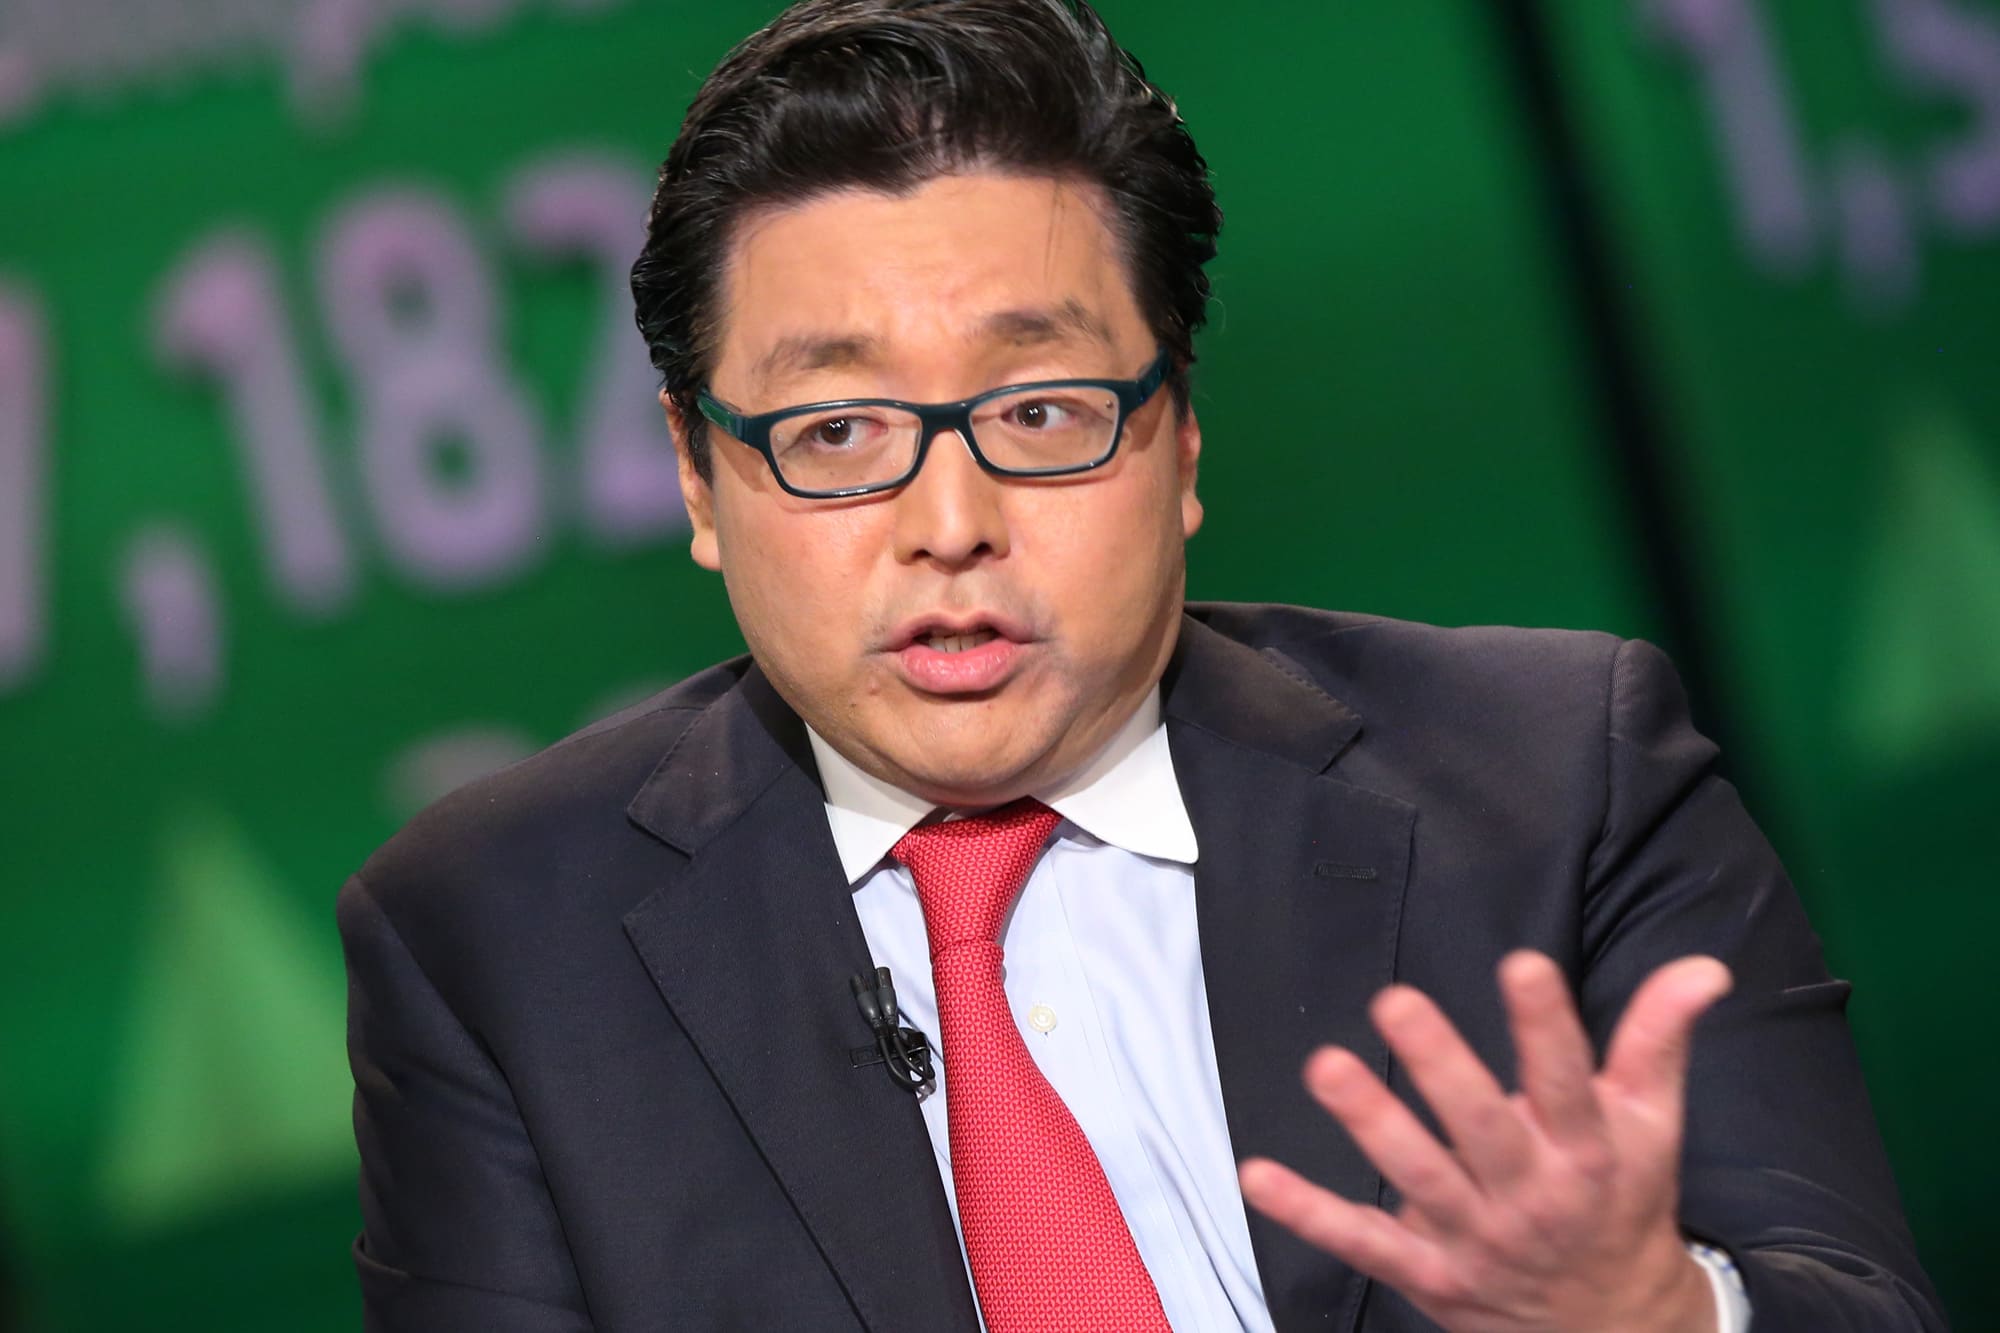 Tom Lee highlights the top picks in his market-beating portfolio